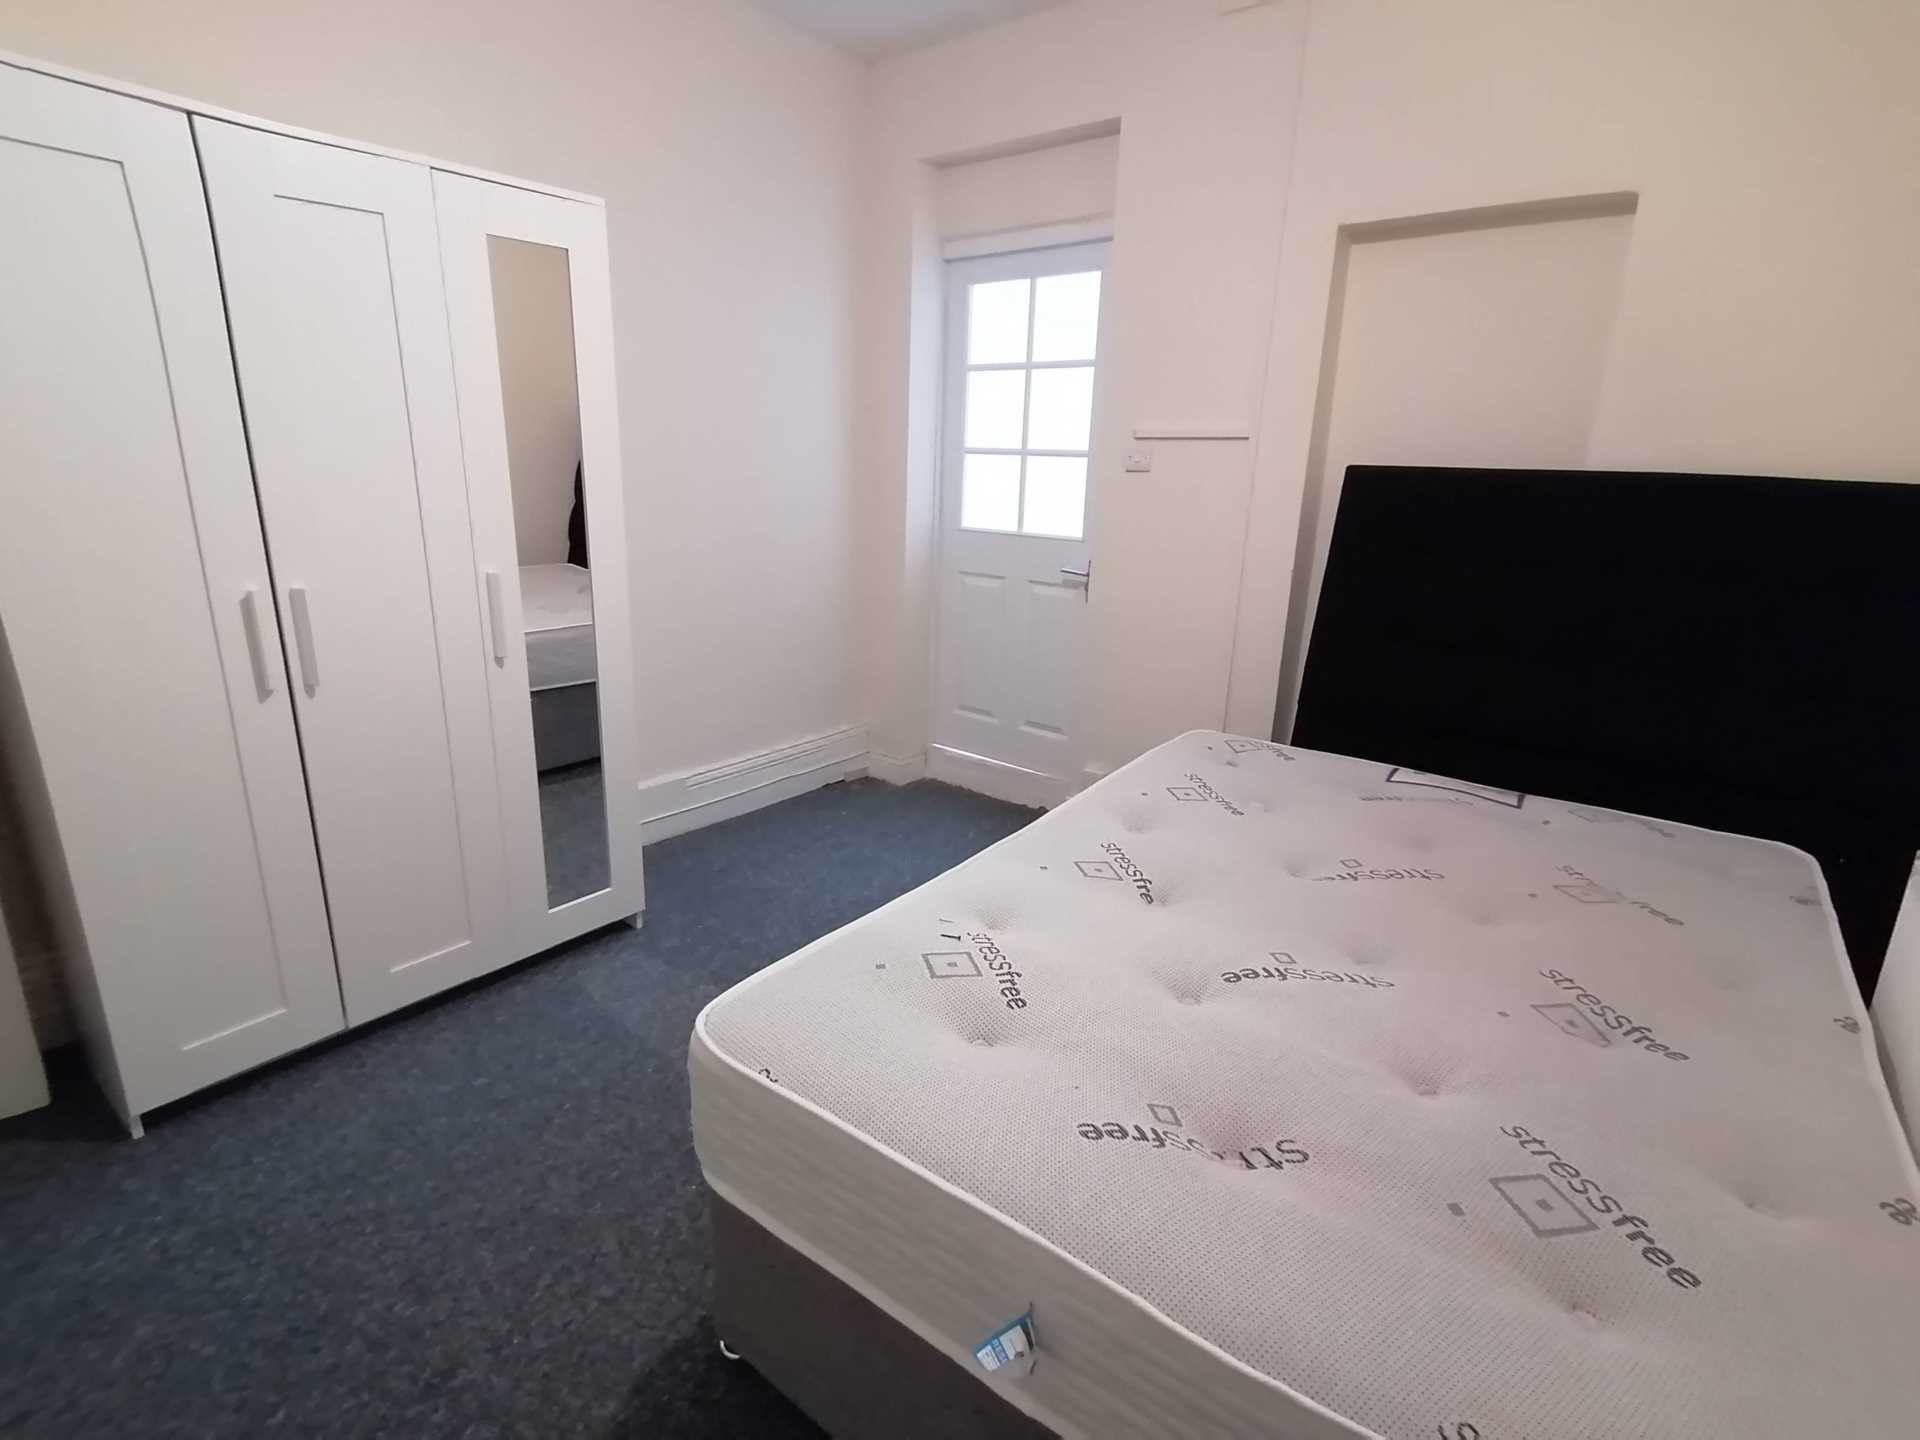 1 bed Room for rent in Reading. From Reading Estate Agent